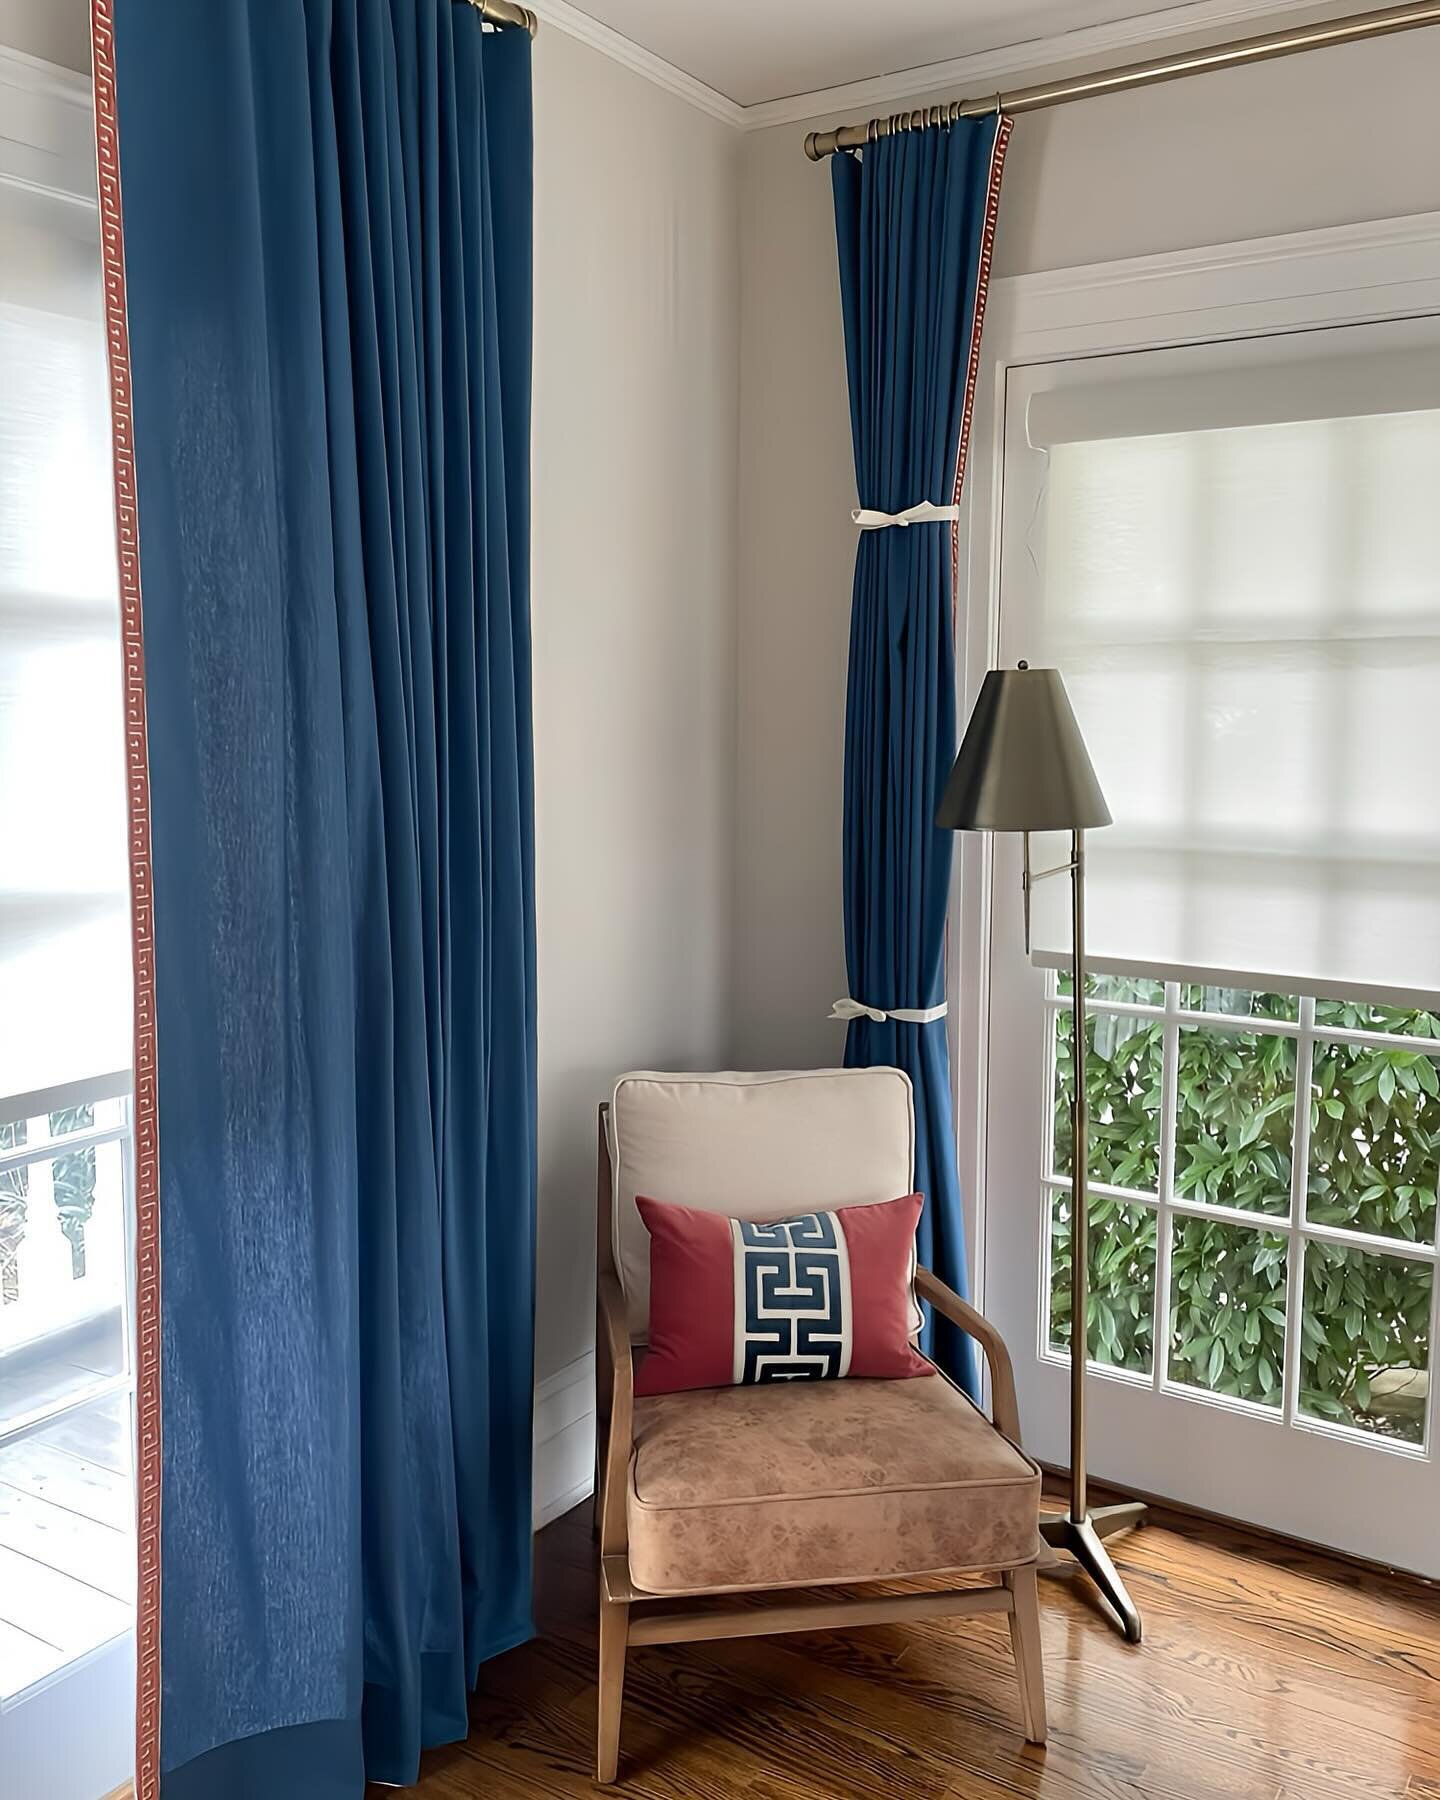 These #familyroom #drapes are hung and in the process of being trained. Gathering the folds of your new drapery panels and securing with ribbon #trains them to look their best 😀  #interiordesign #customdrapery #blueandrust #draperytrim #draperytrimm